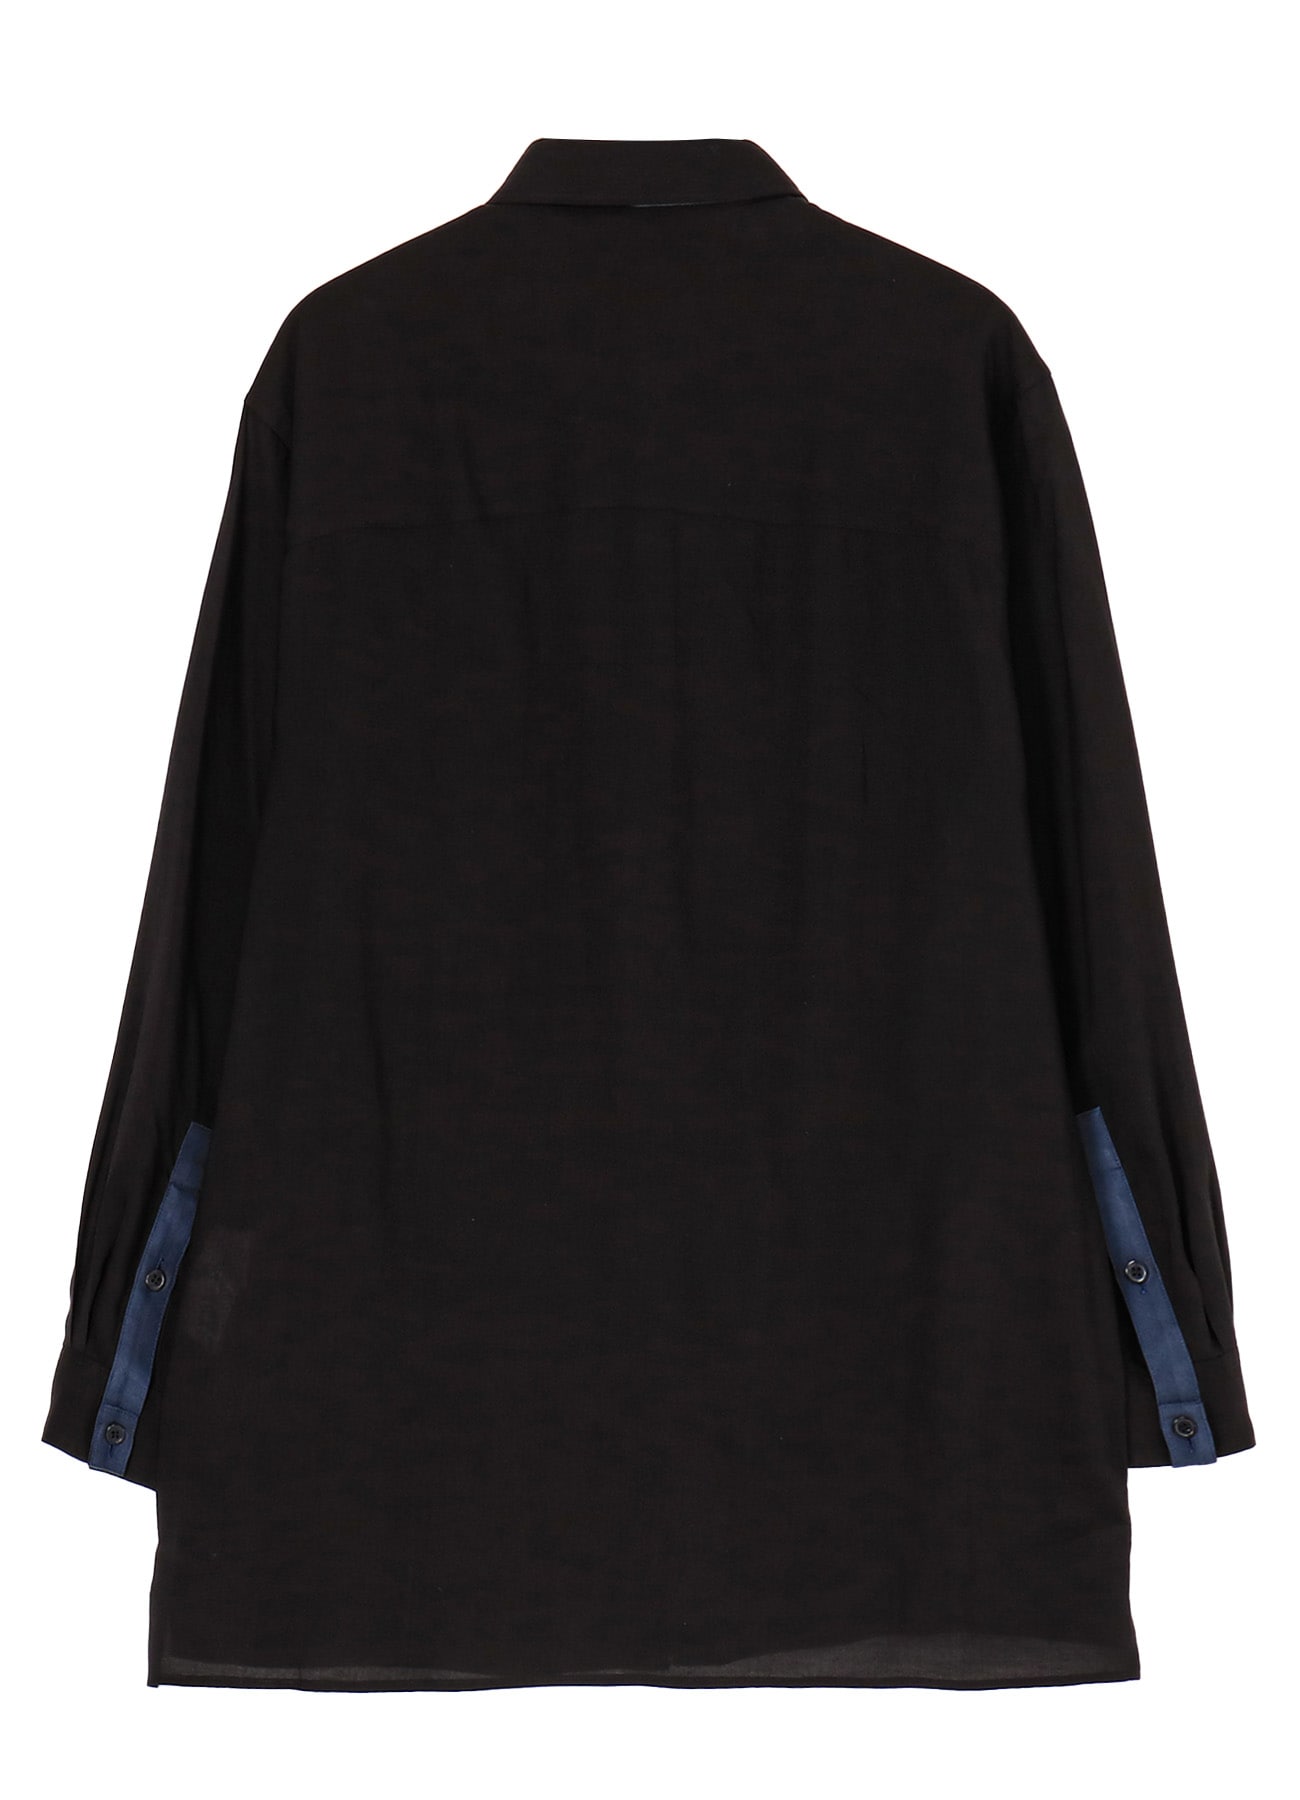 CELLULOSE LOAN CHEST PANEL BLOUSE WITH NAVY CLOTH